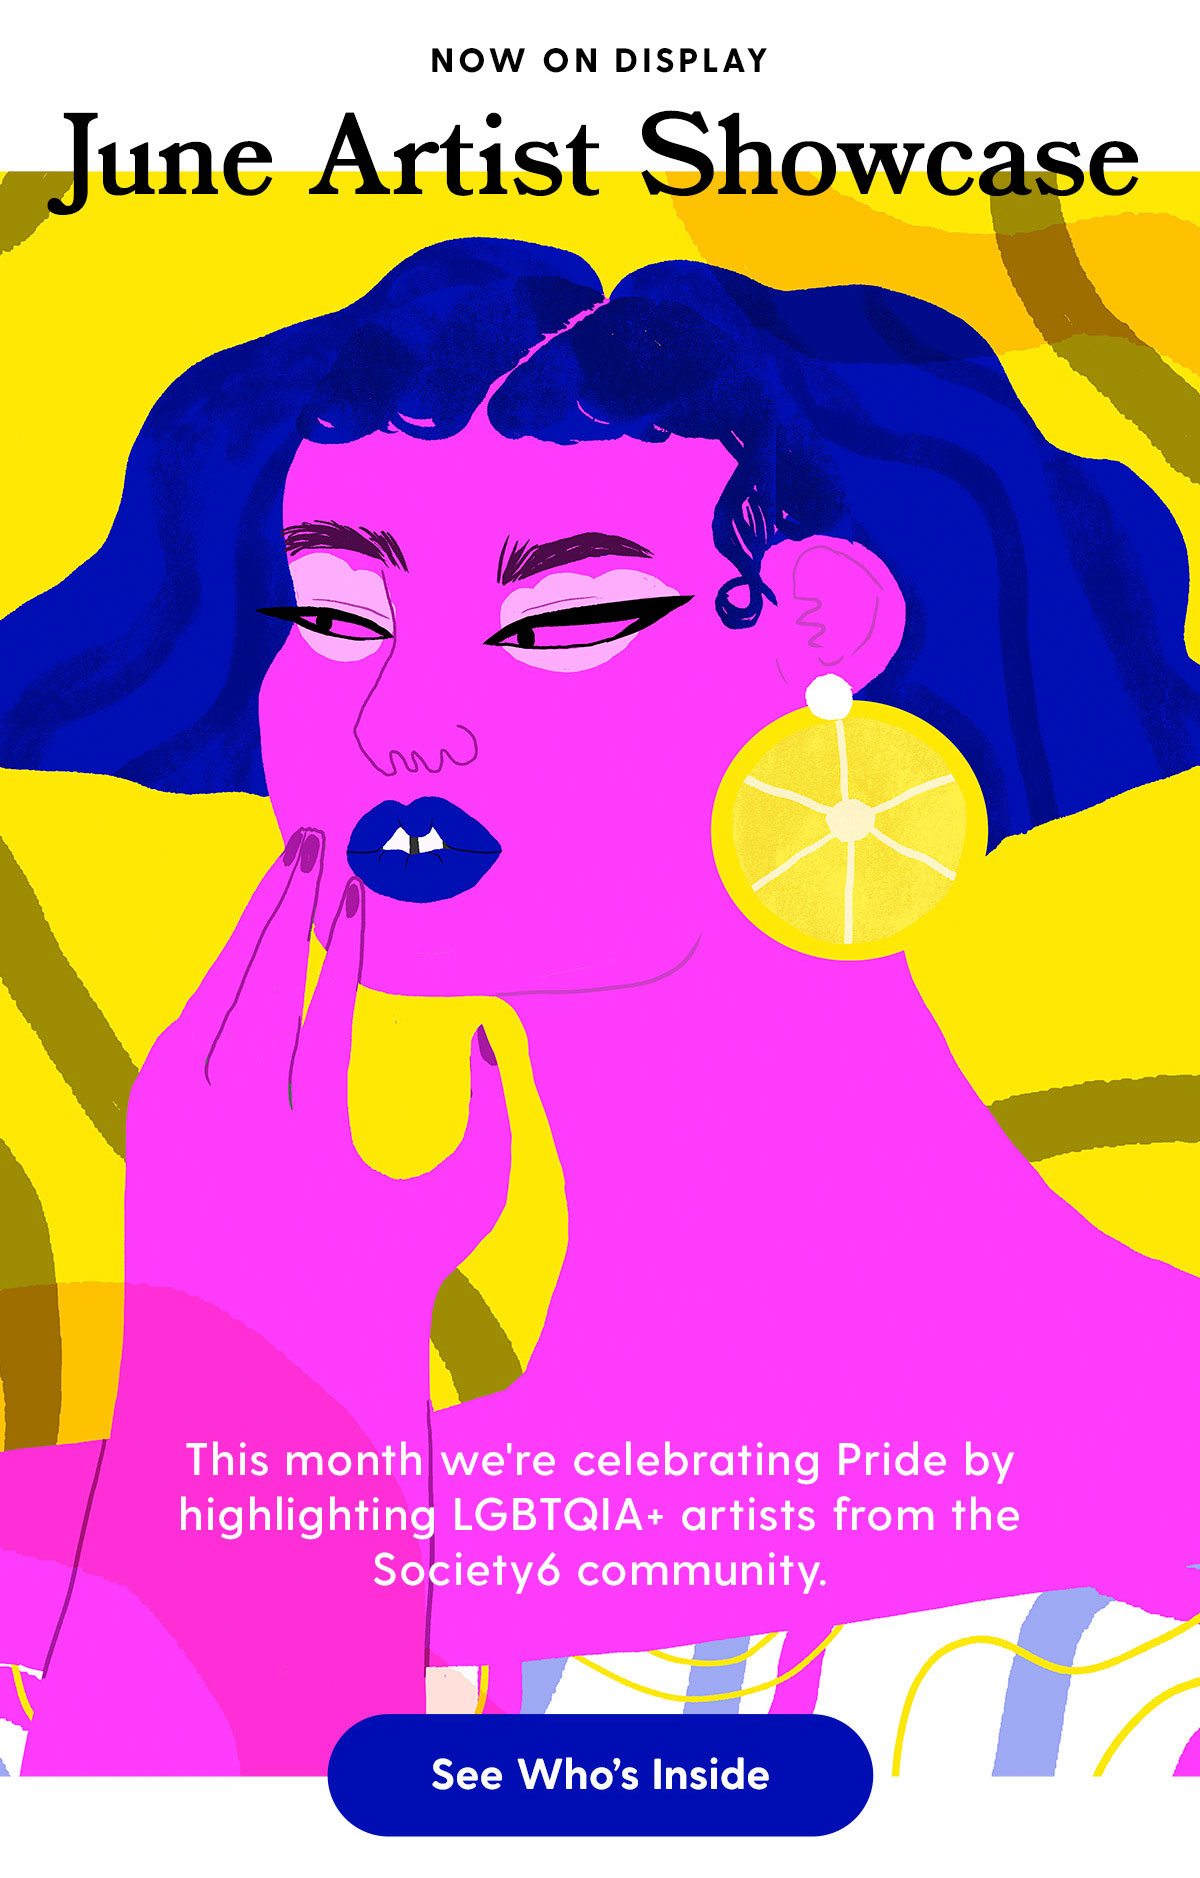 NOW ON DISPLAY: The June Artist Showcase. This month we're celebrating Pride Month by highlighting LGBTQIA+ artists from the Society6 community. See Who's Inside